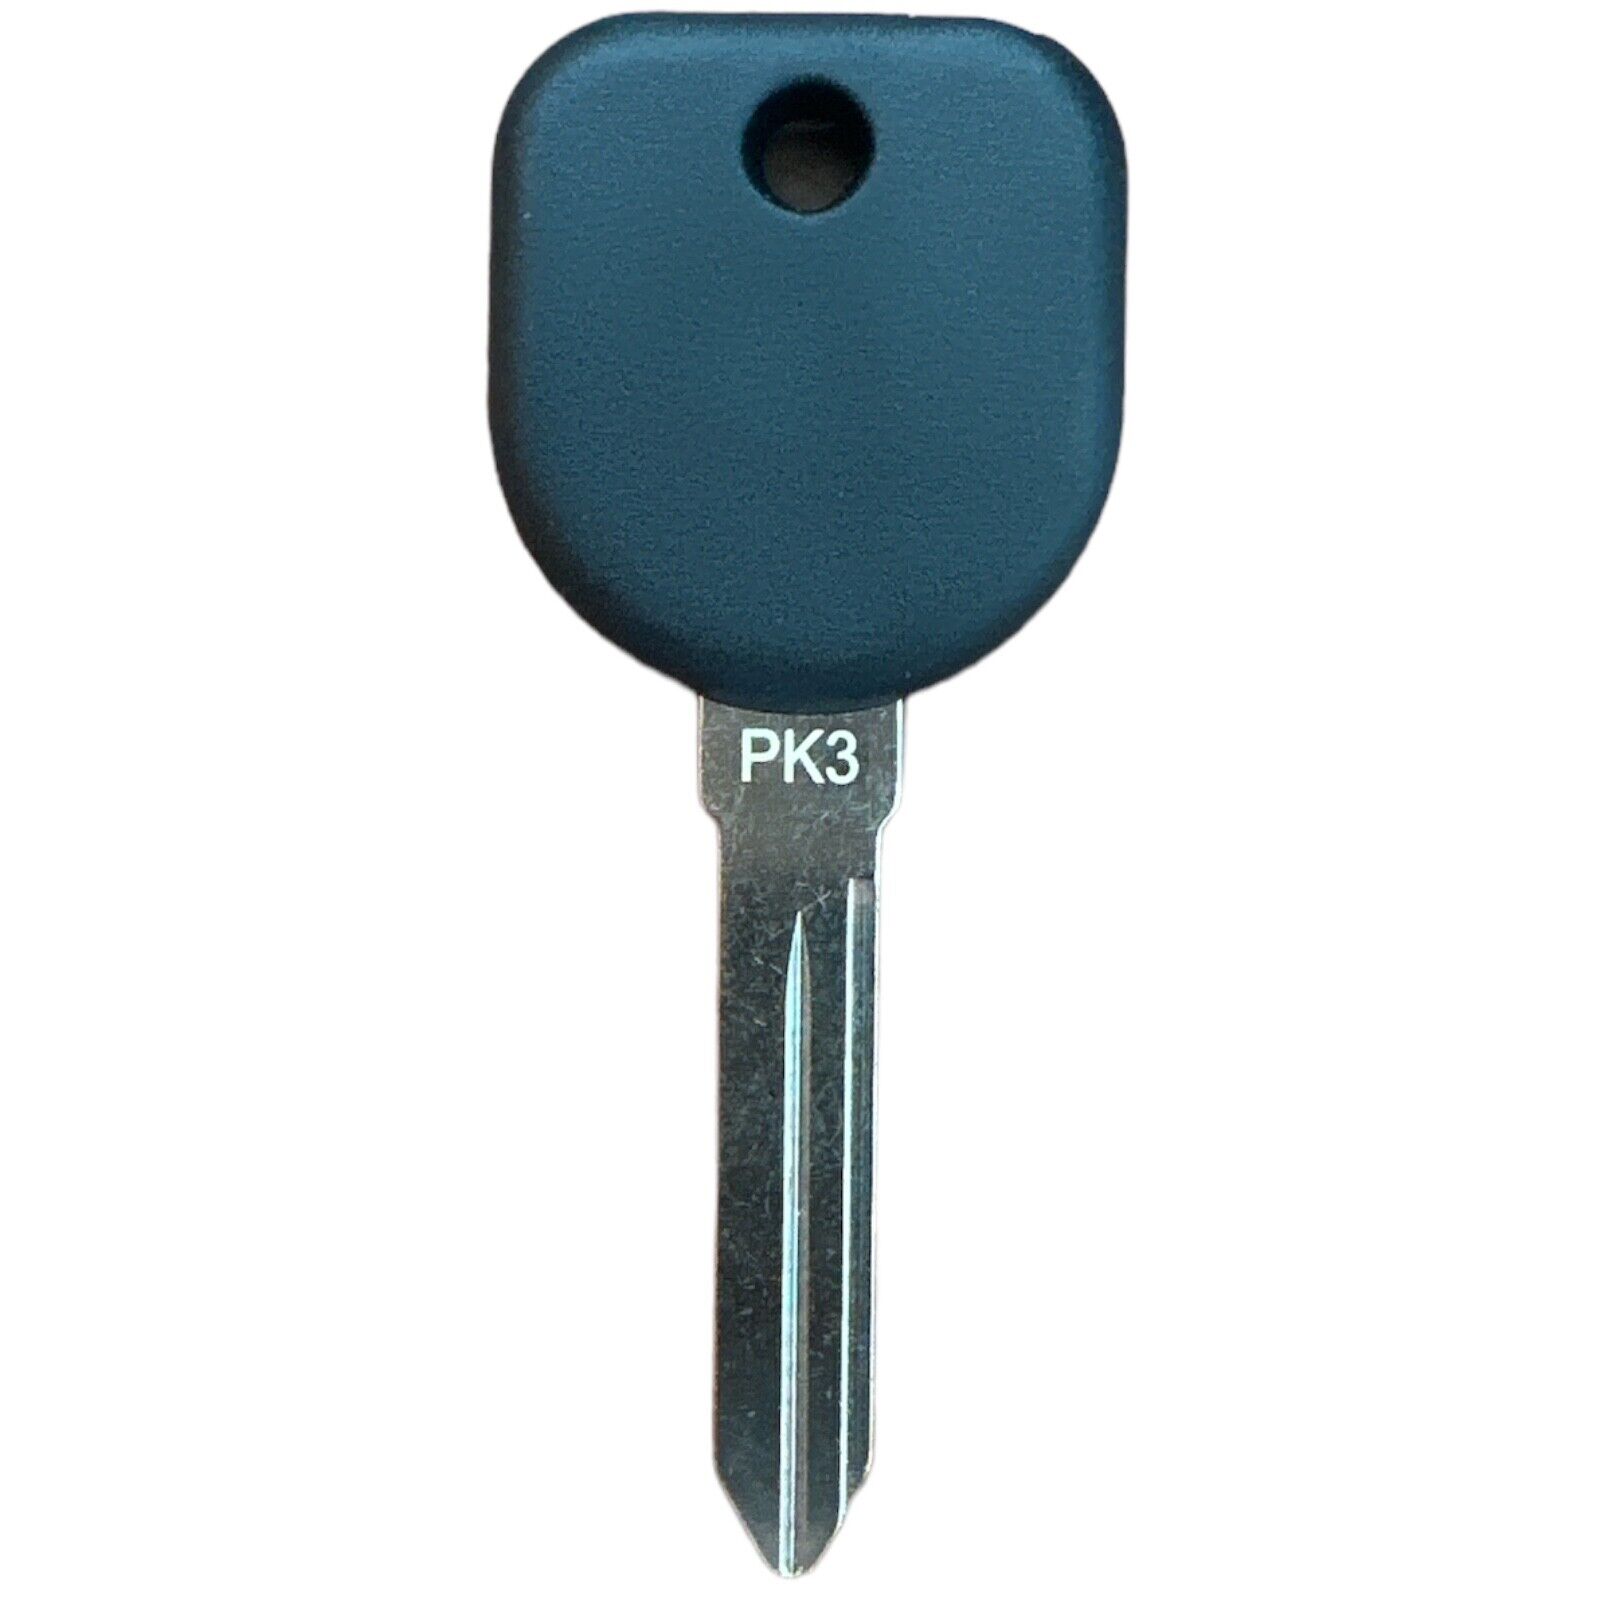 New Uncut Blank Chipped Transponder key Replacement for GM PK3+ B99